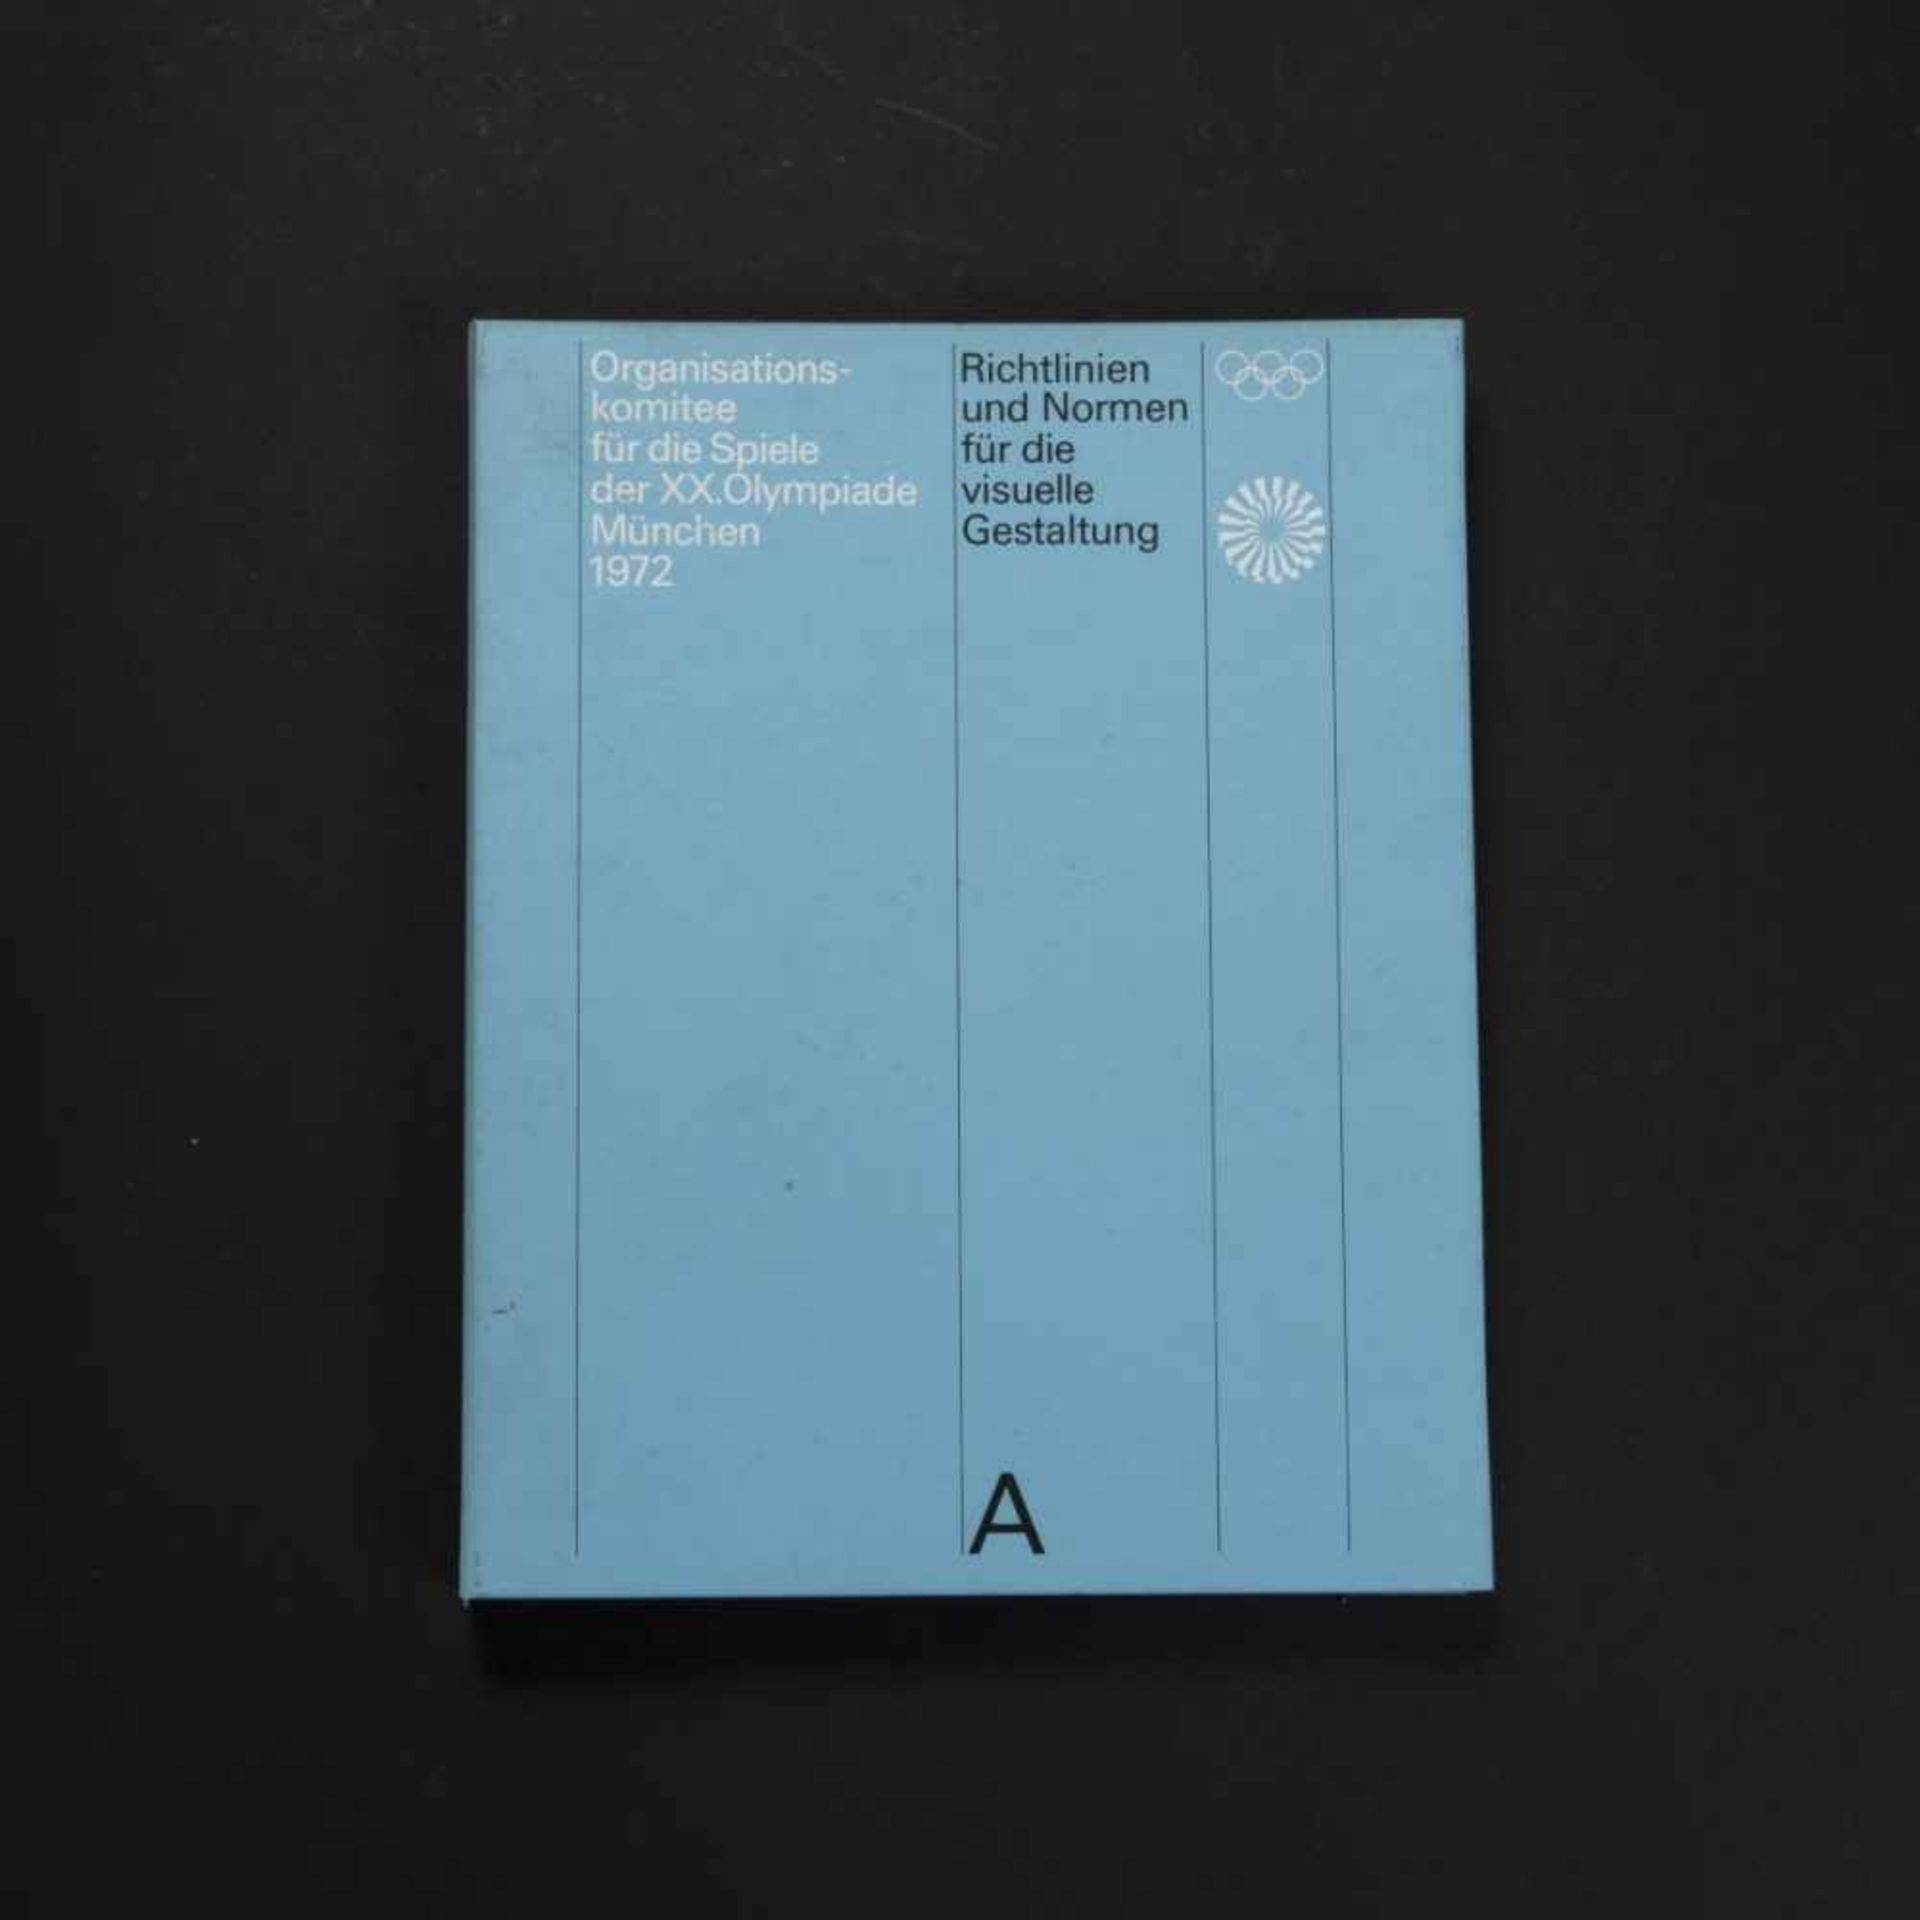 O. Aicher, Standards with chapter 'Waldi', 1969Standards with chapter 'Waldi', 1969Otl Aicher.